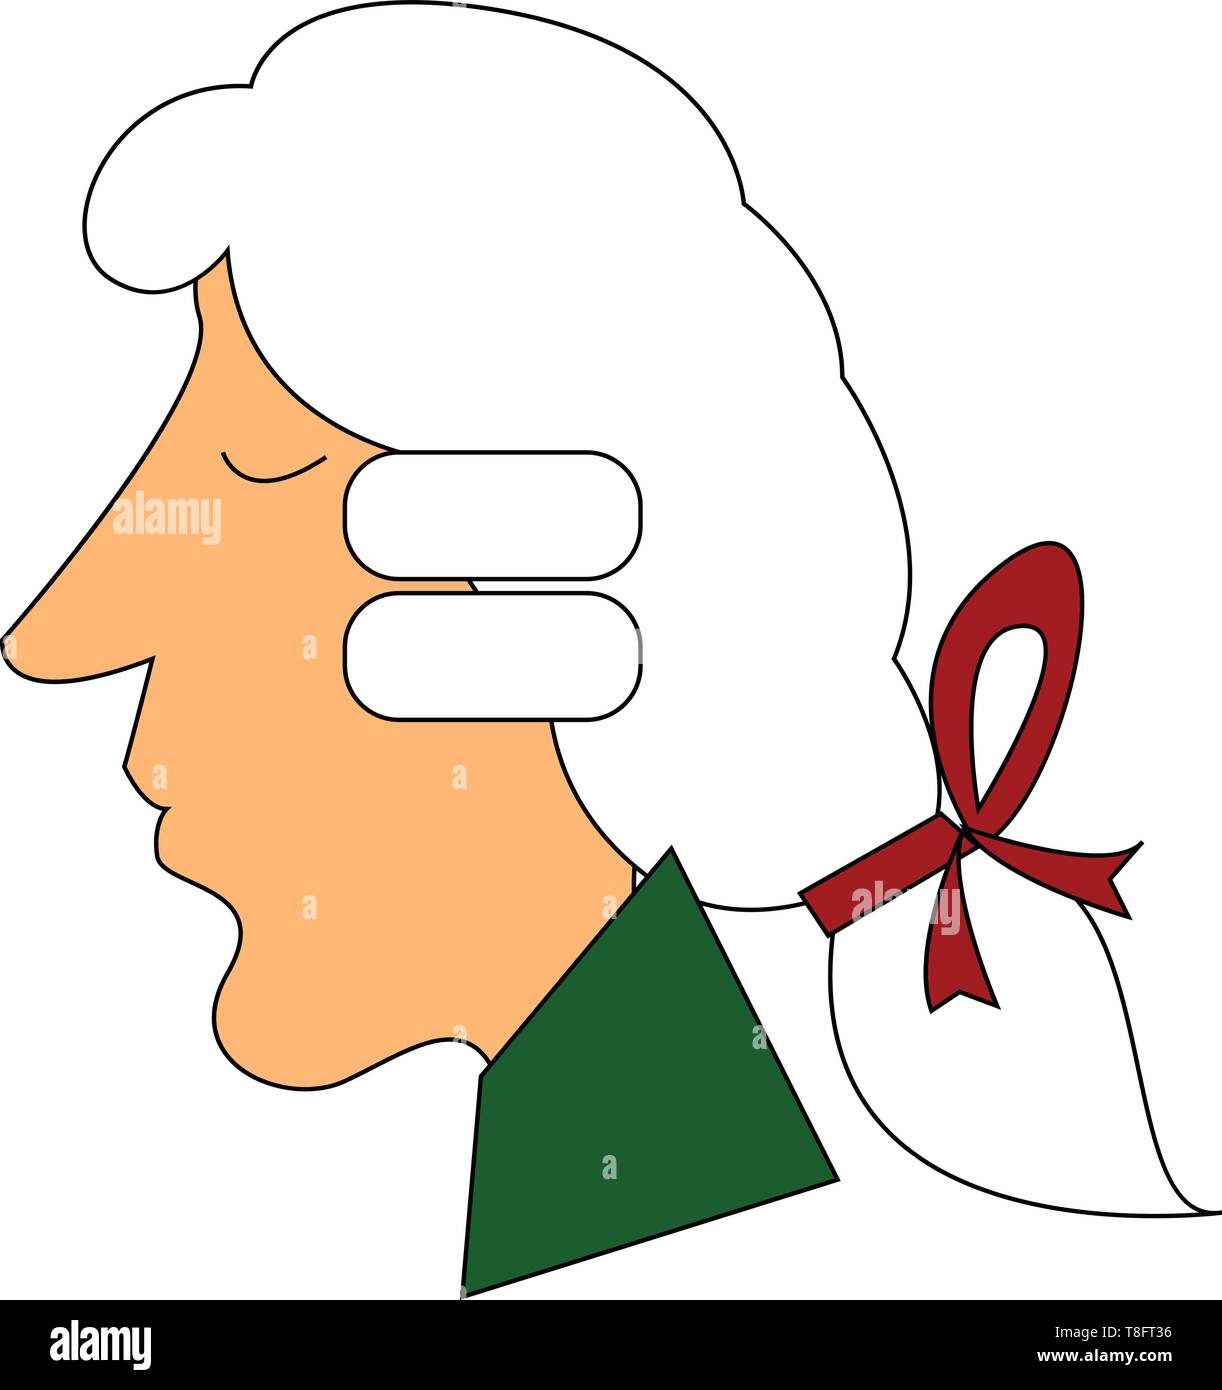 A matured man in a green top, white wig tied together with a red ribbon, has a long unpointed nose and with his eyes closed looks peaceful viewed from Stock Vector